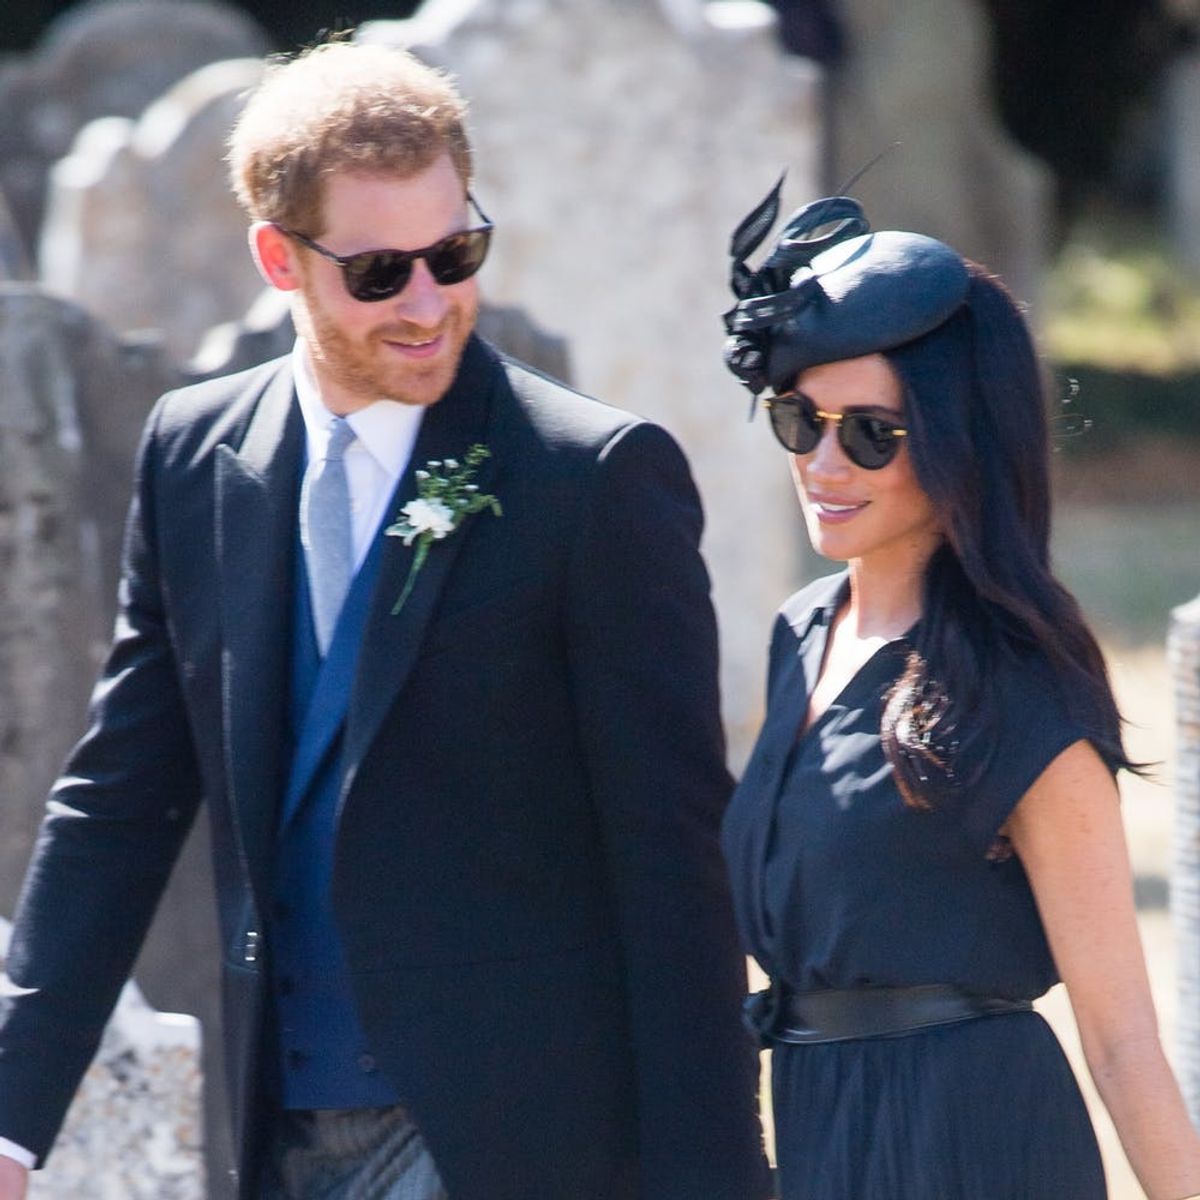 Meghan Markle Attends a Friend’s Wedding as the Royals Wish Her a Happy Birthday